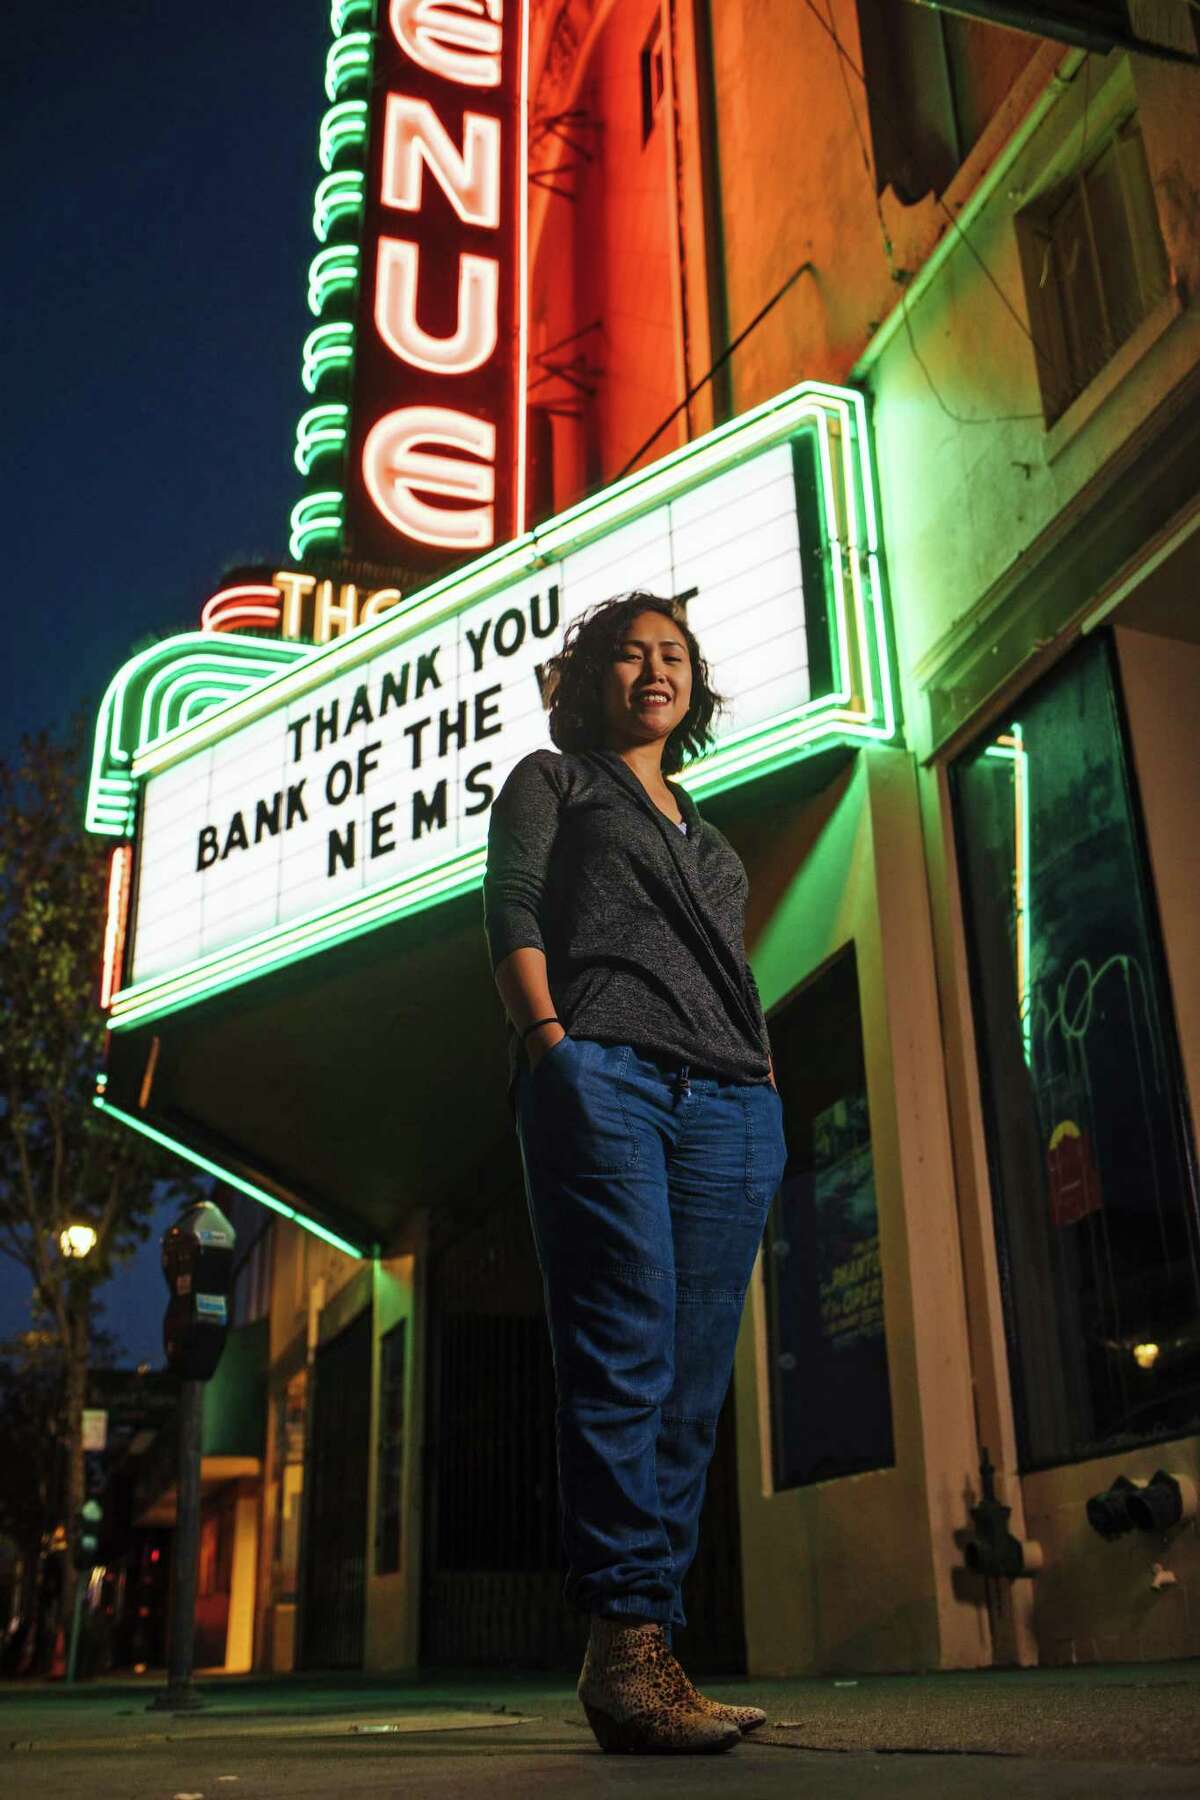 Rica Sunga-Kwan, owner of the Churn Urban Creamery, photographed outside the Avenue Theater in San Francisco, Calif. Thursday, September 14, 2017.